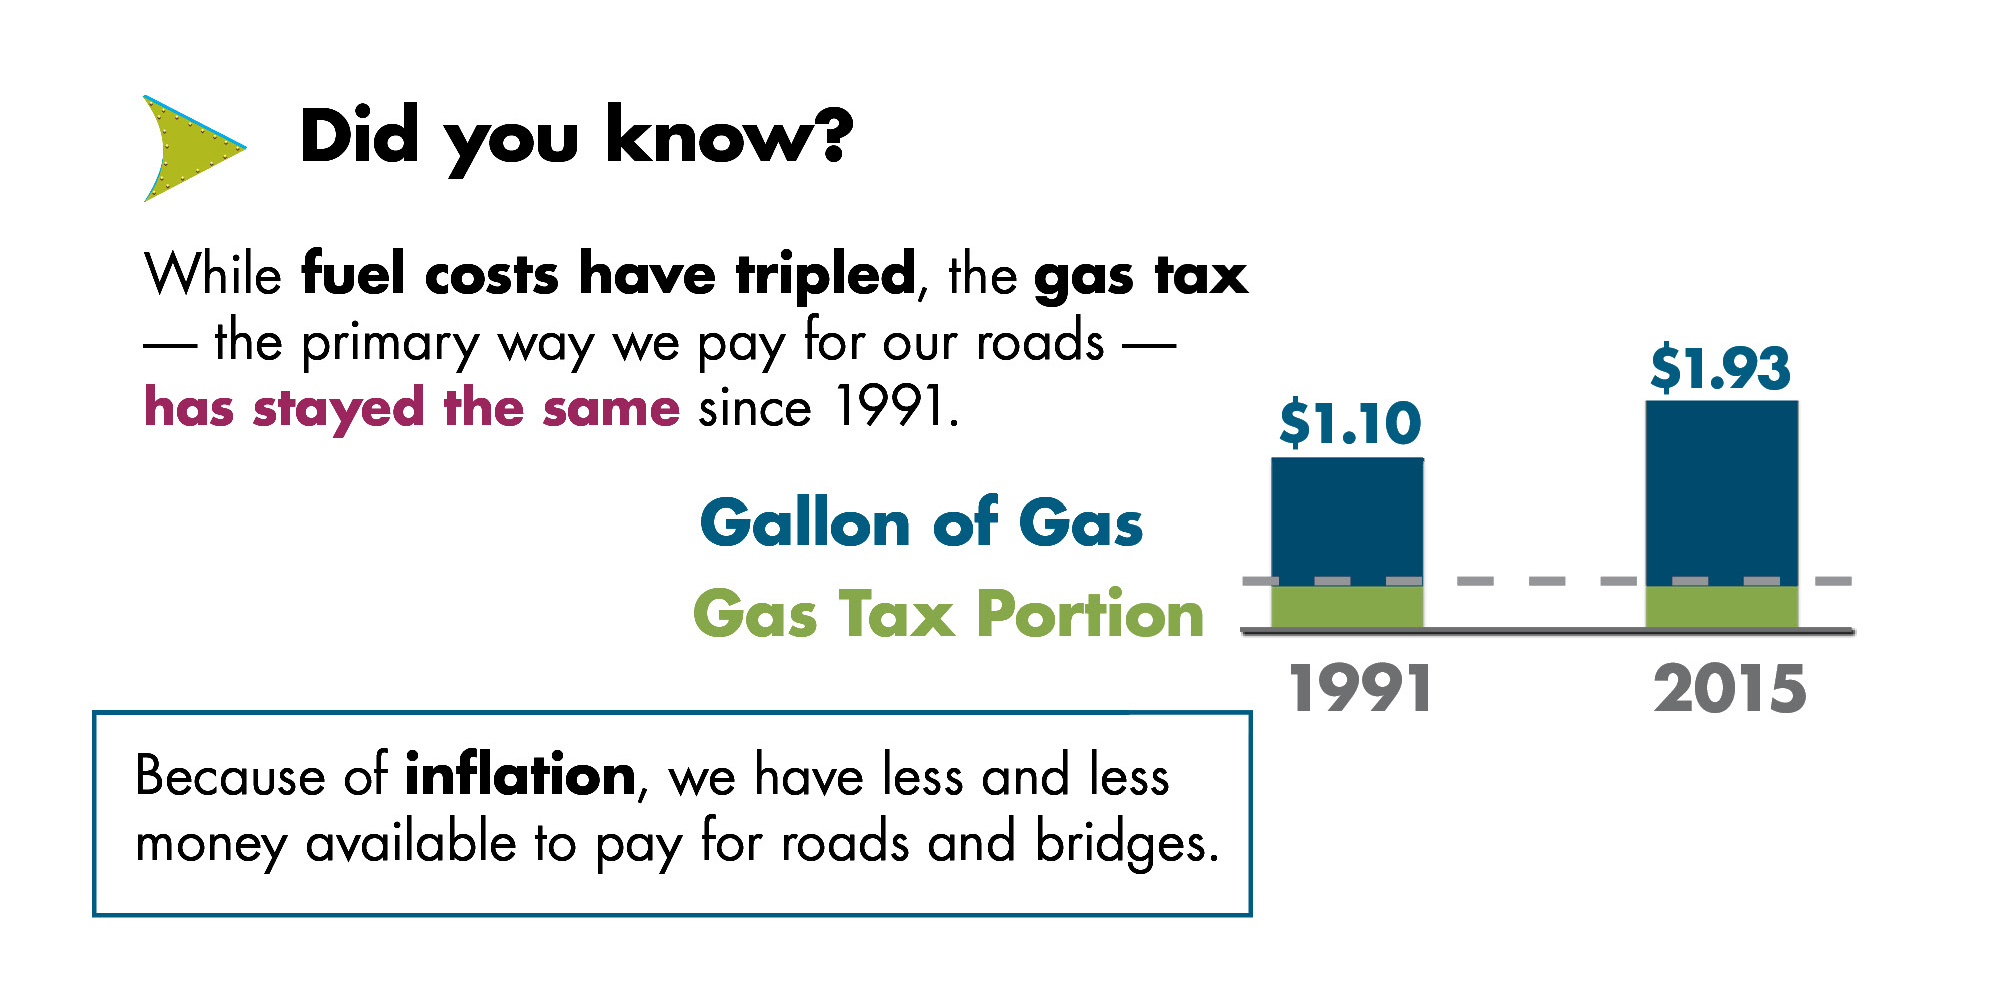 While fuel costs have tripled, the gas tax has stayed the same since 1991.